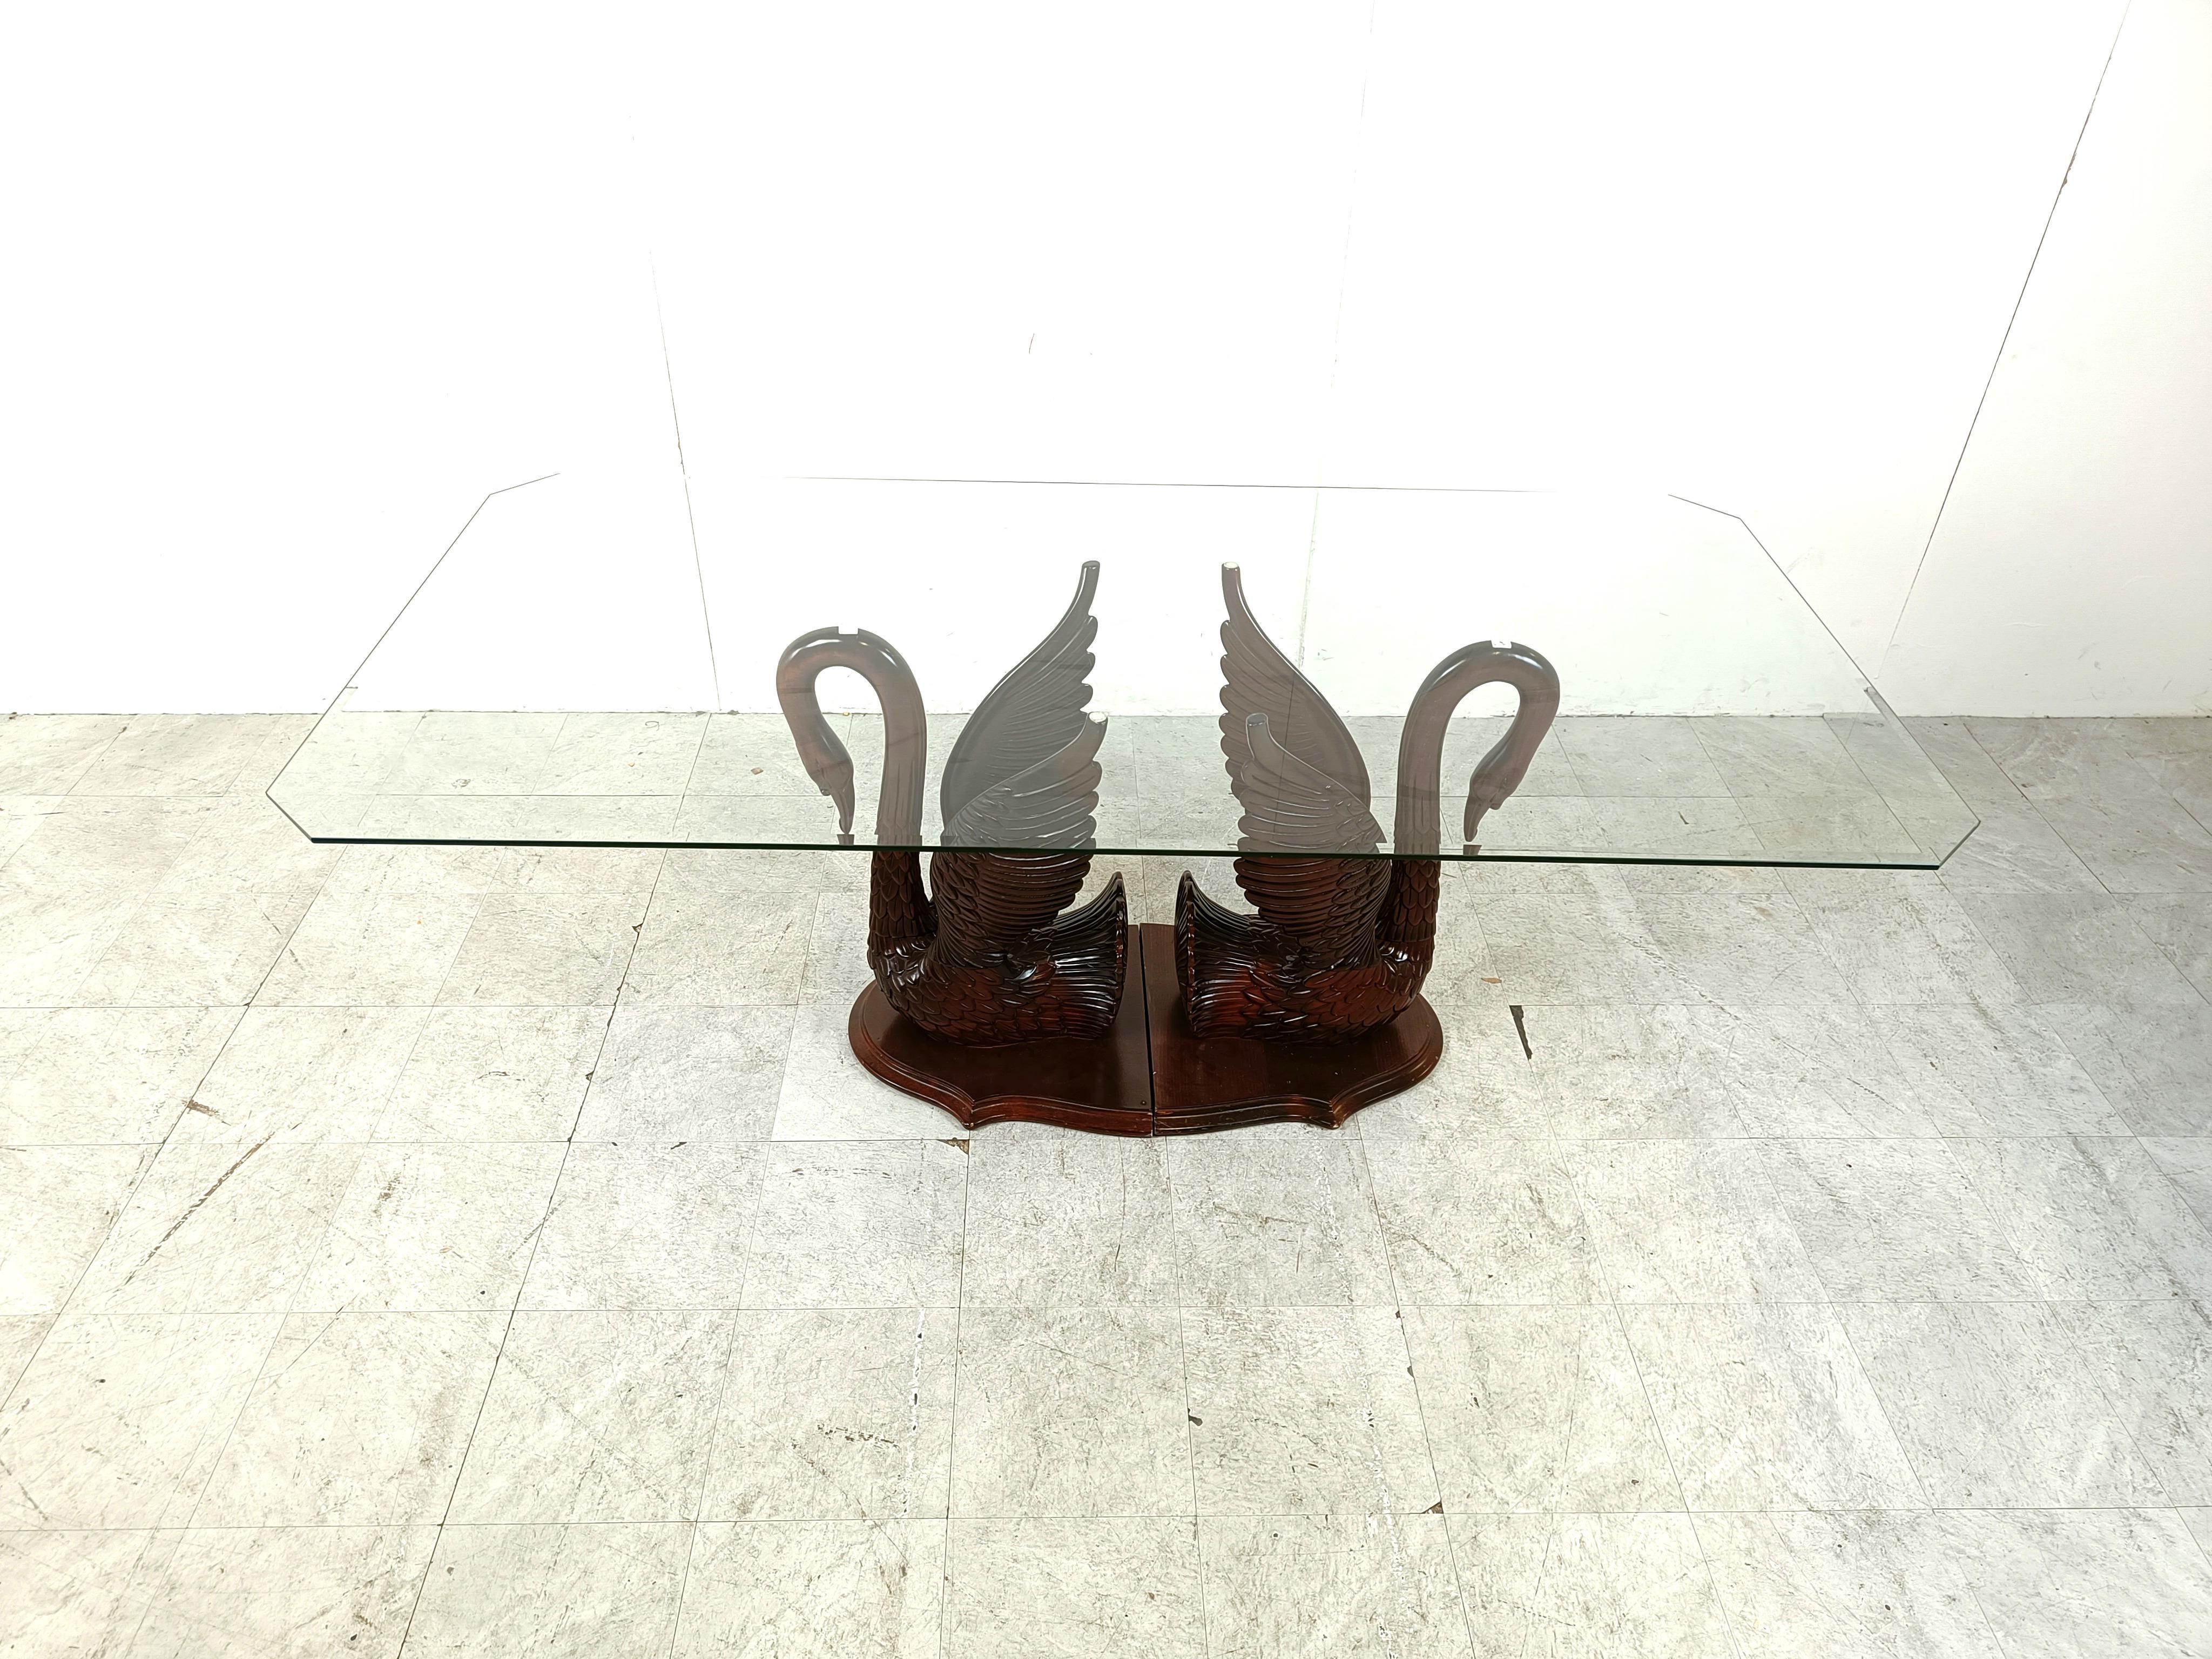 Exquisite sculpted mahogany swan dining table with a clear beveled glass table top.

Beautifully carved sculpture.

Good overall condition

1960s - France 

Height: 76cm
Width: 200cm
Depth: 100cm

Ref: 103322